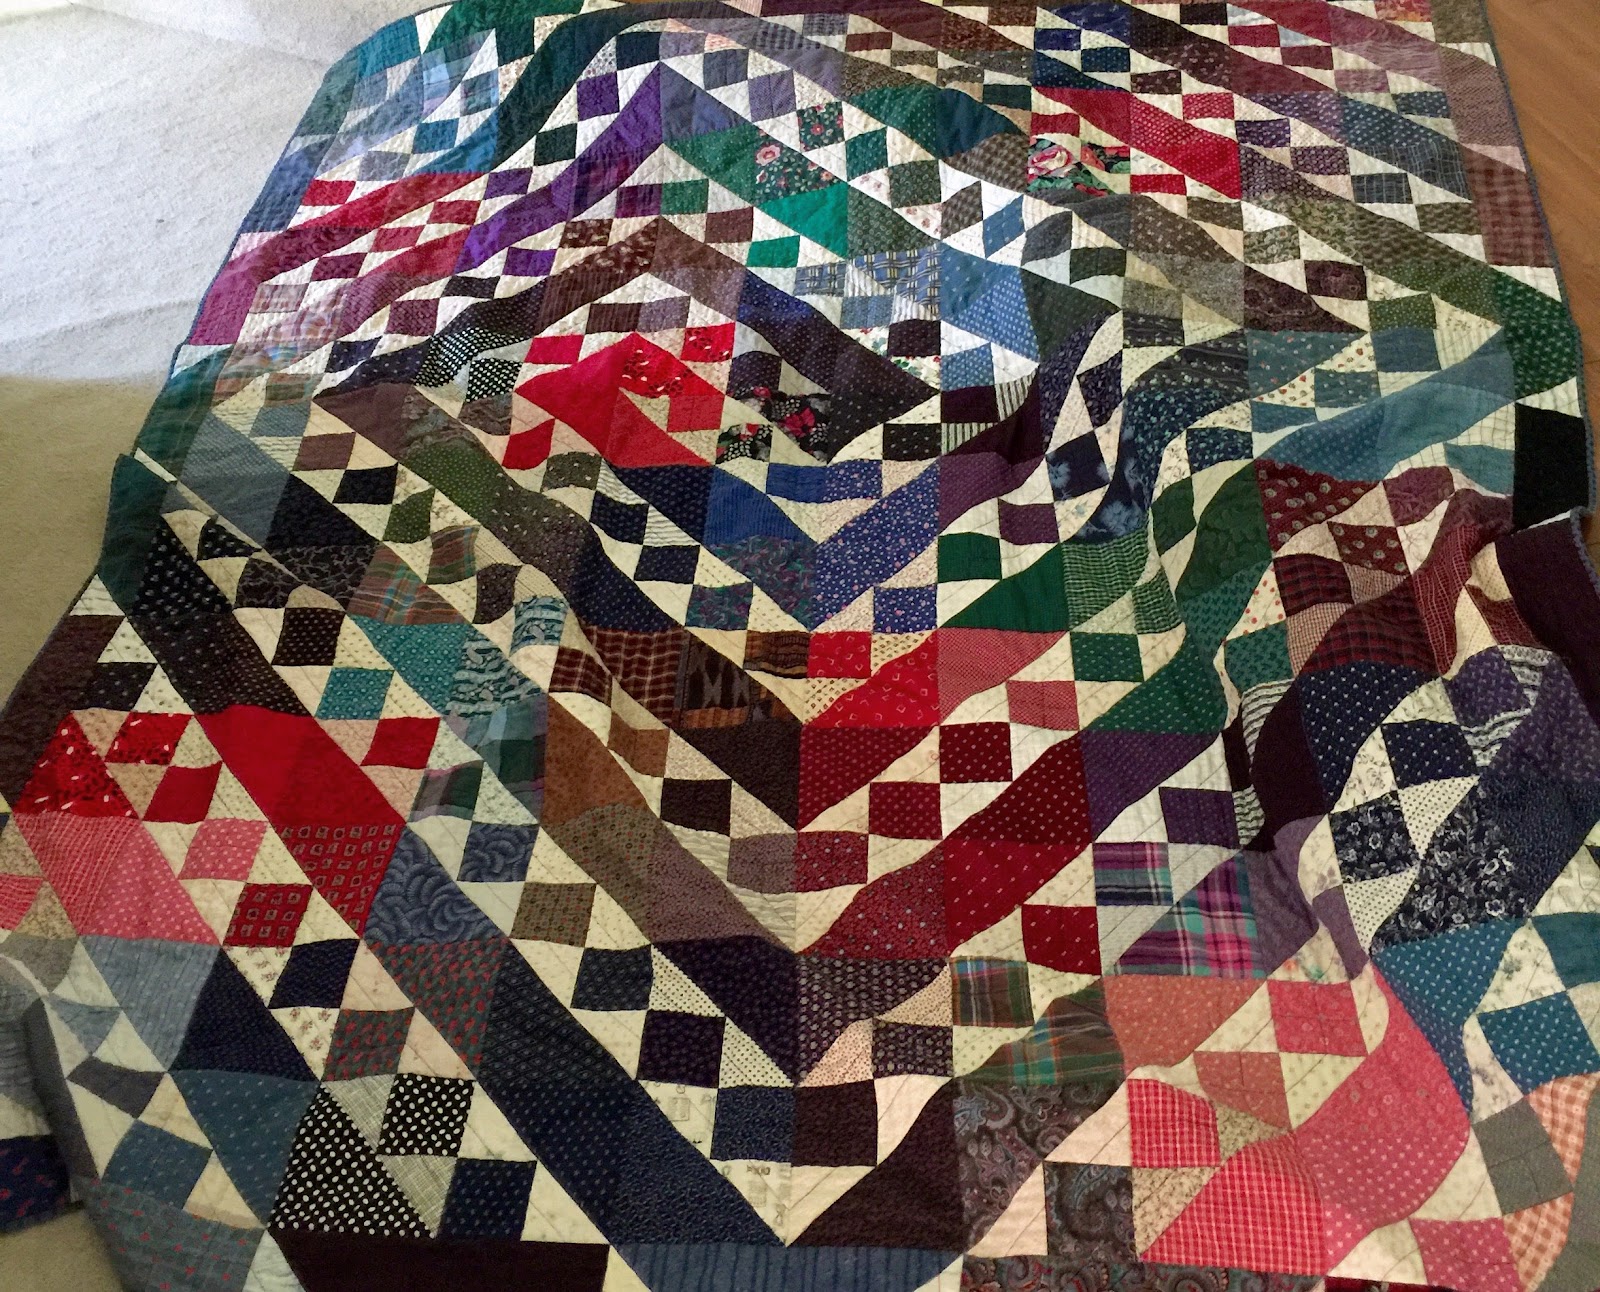 Fret Not Yourself: Handing Down Quilts